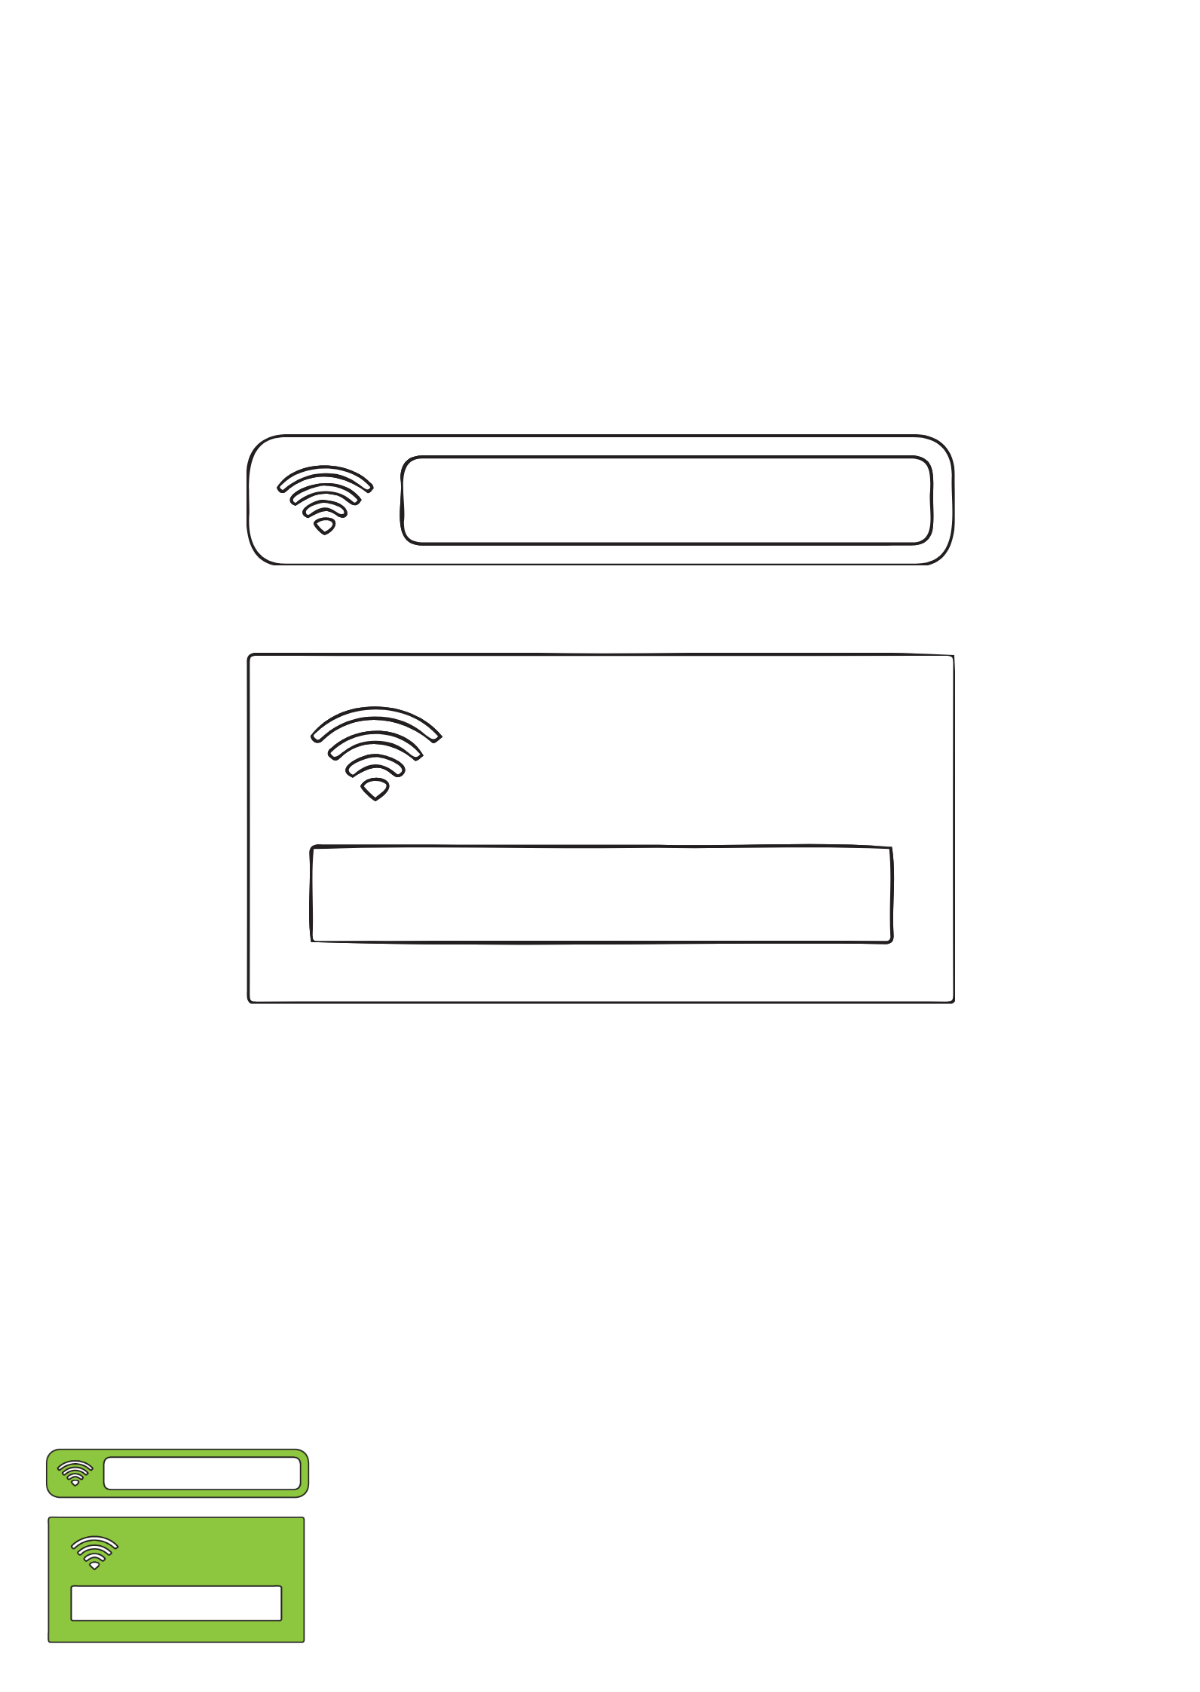 Wifi Password coloring page Template